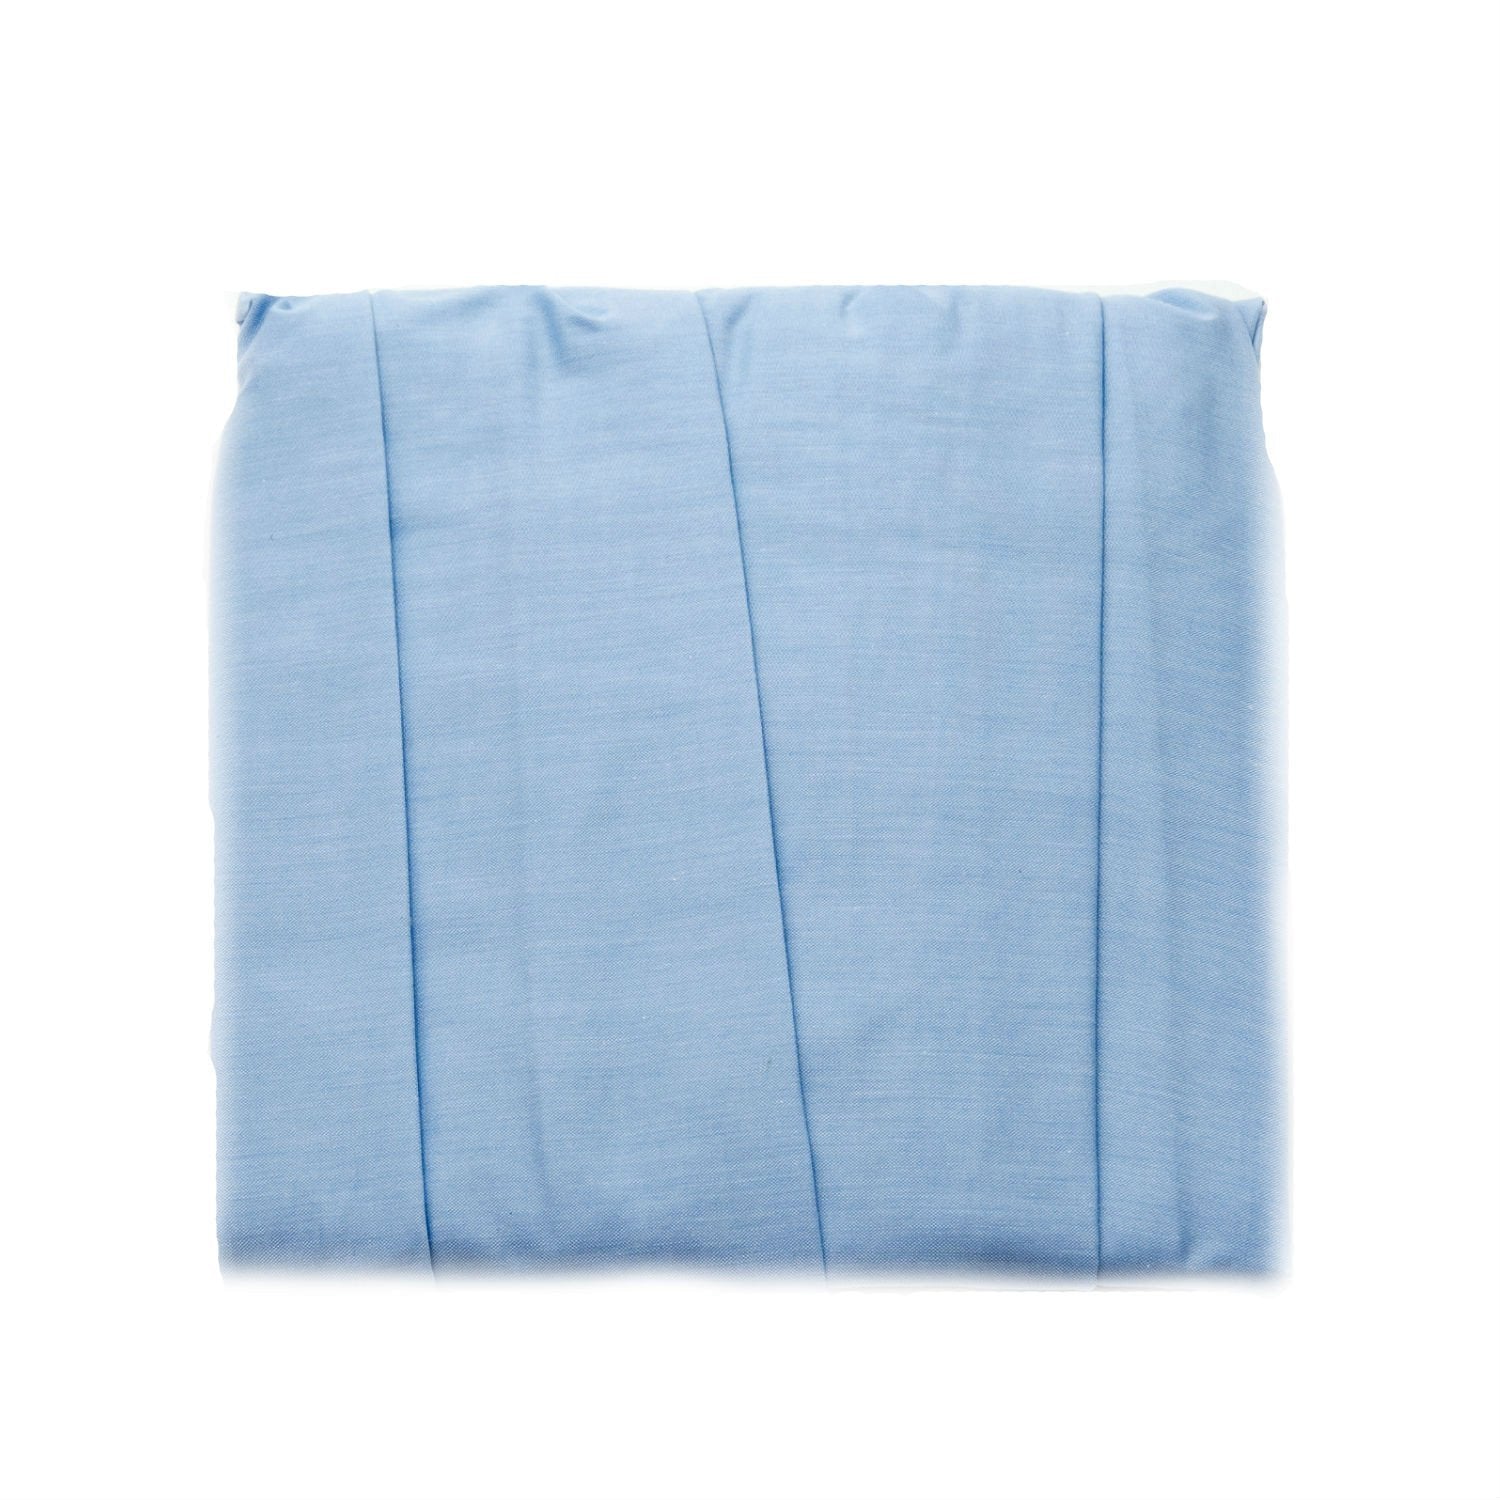 Crib Bed Skirt With Blue Oxford